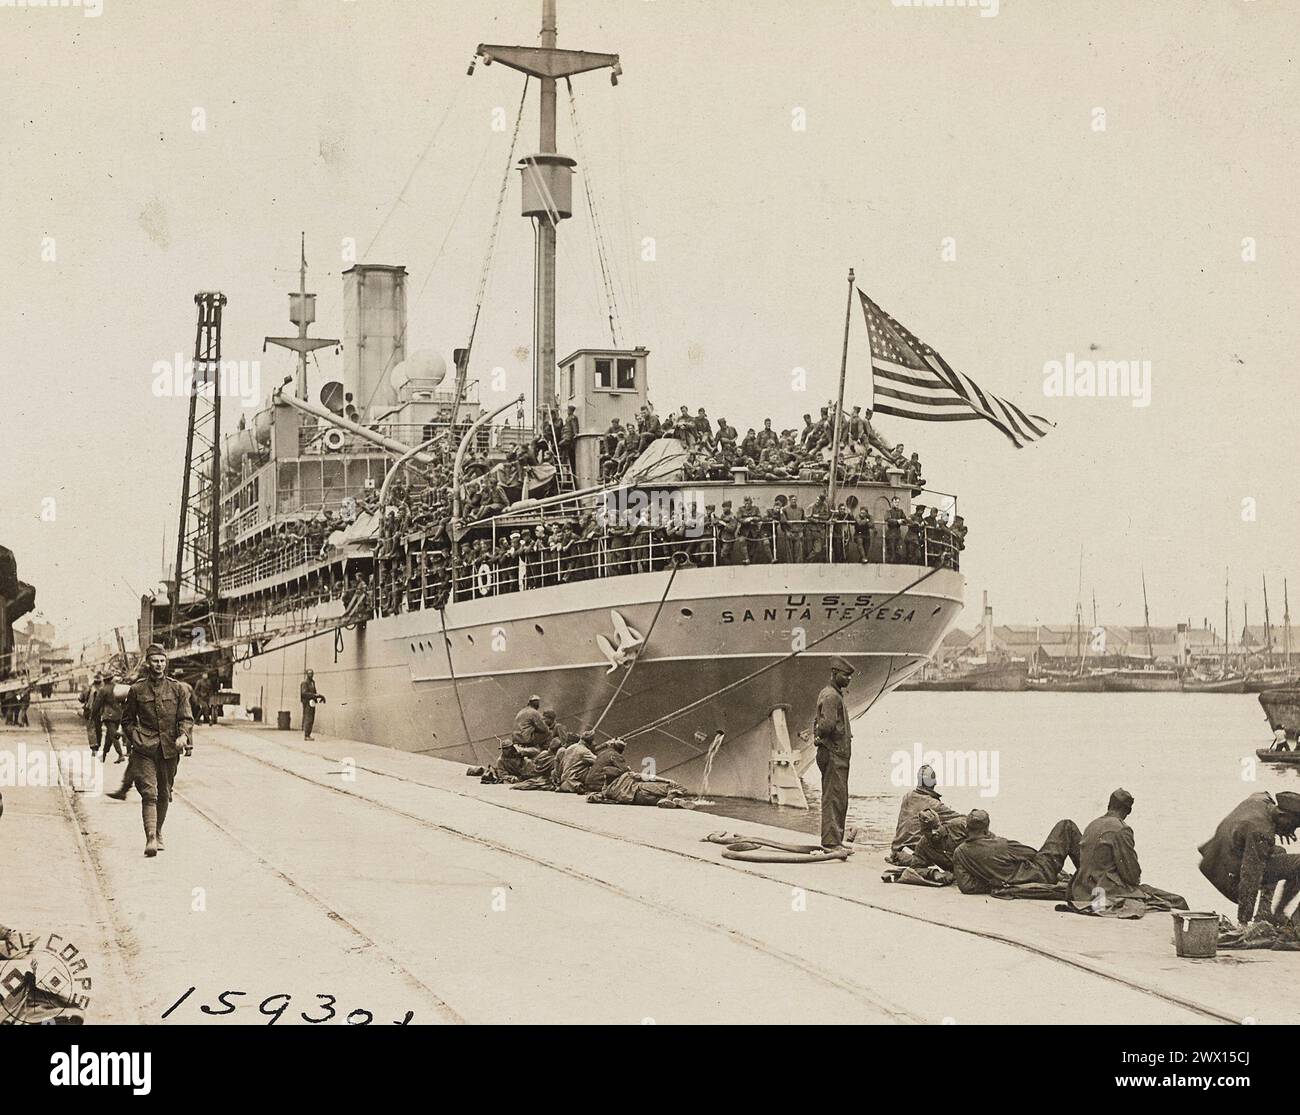 USS Santa Teresa loaded with troops. St. Nazaire, France ca. June 1919 Stock Photo